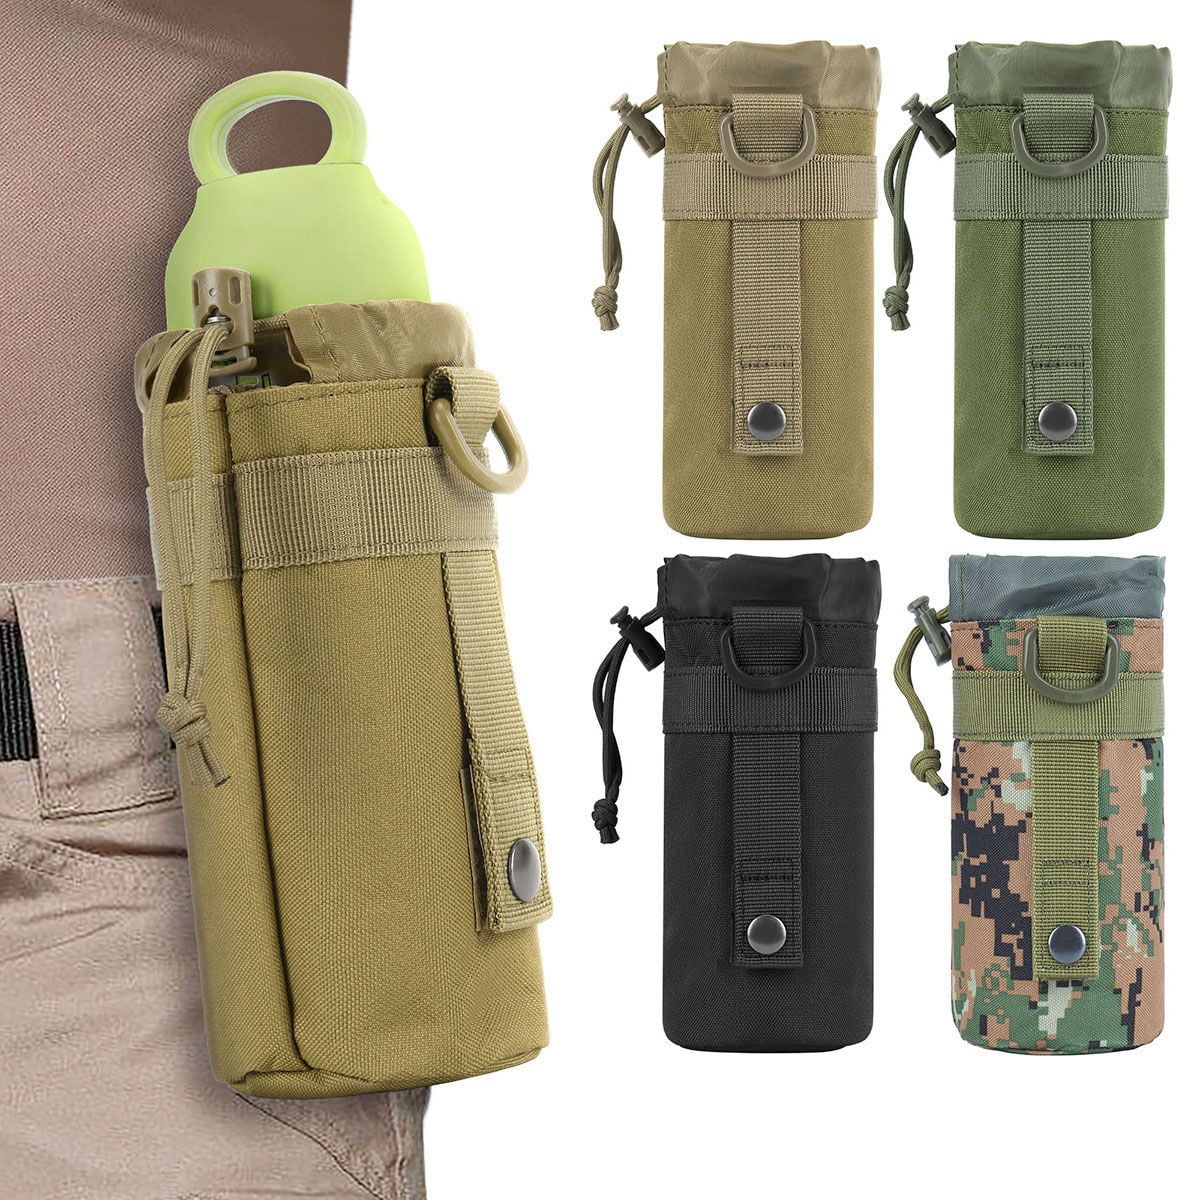 Bassdash Tactical Molle Water Bottle Pouch with Carabiner Foldable Mesh  Holder Bag for Travel Fishing Hunting Hiking Outdoor Activities